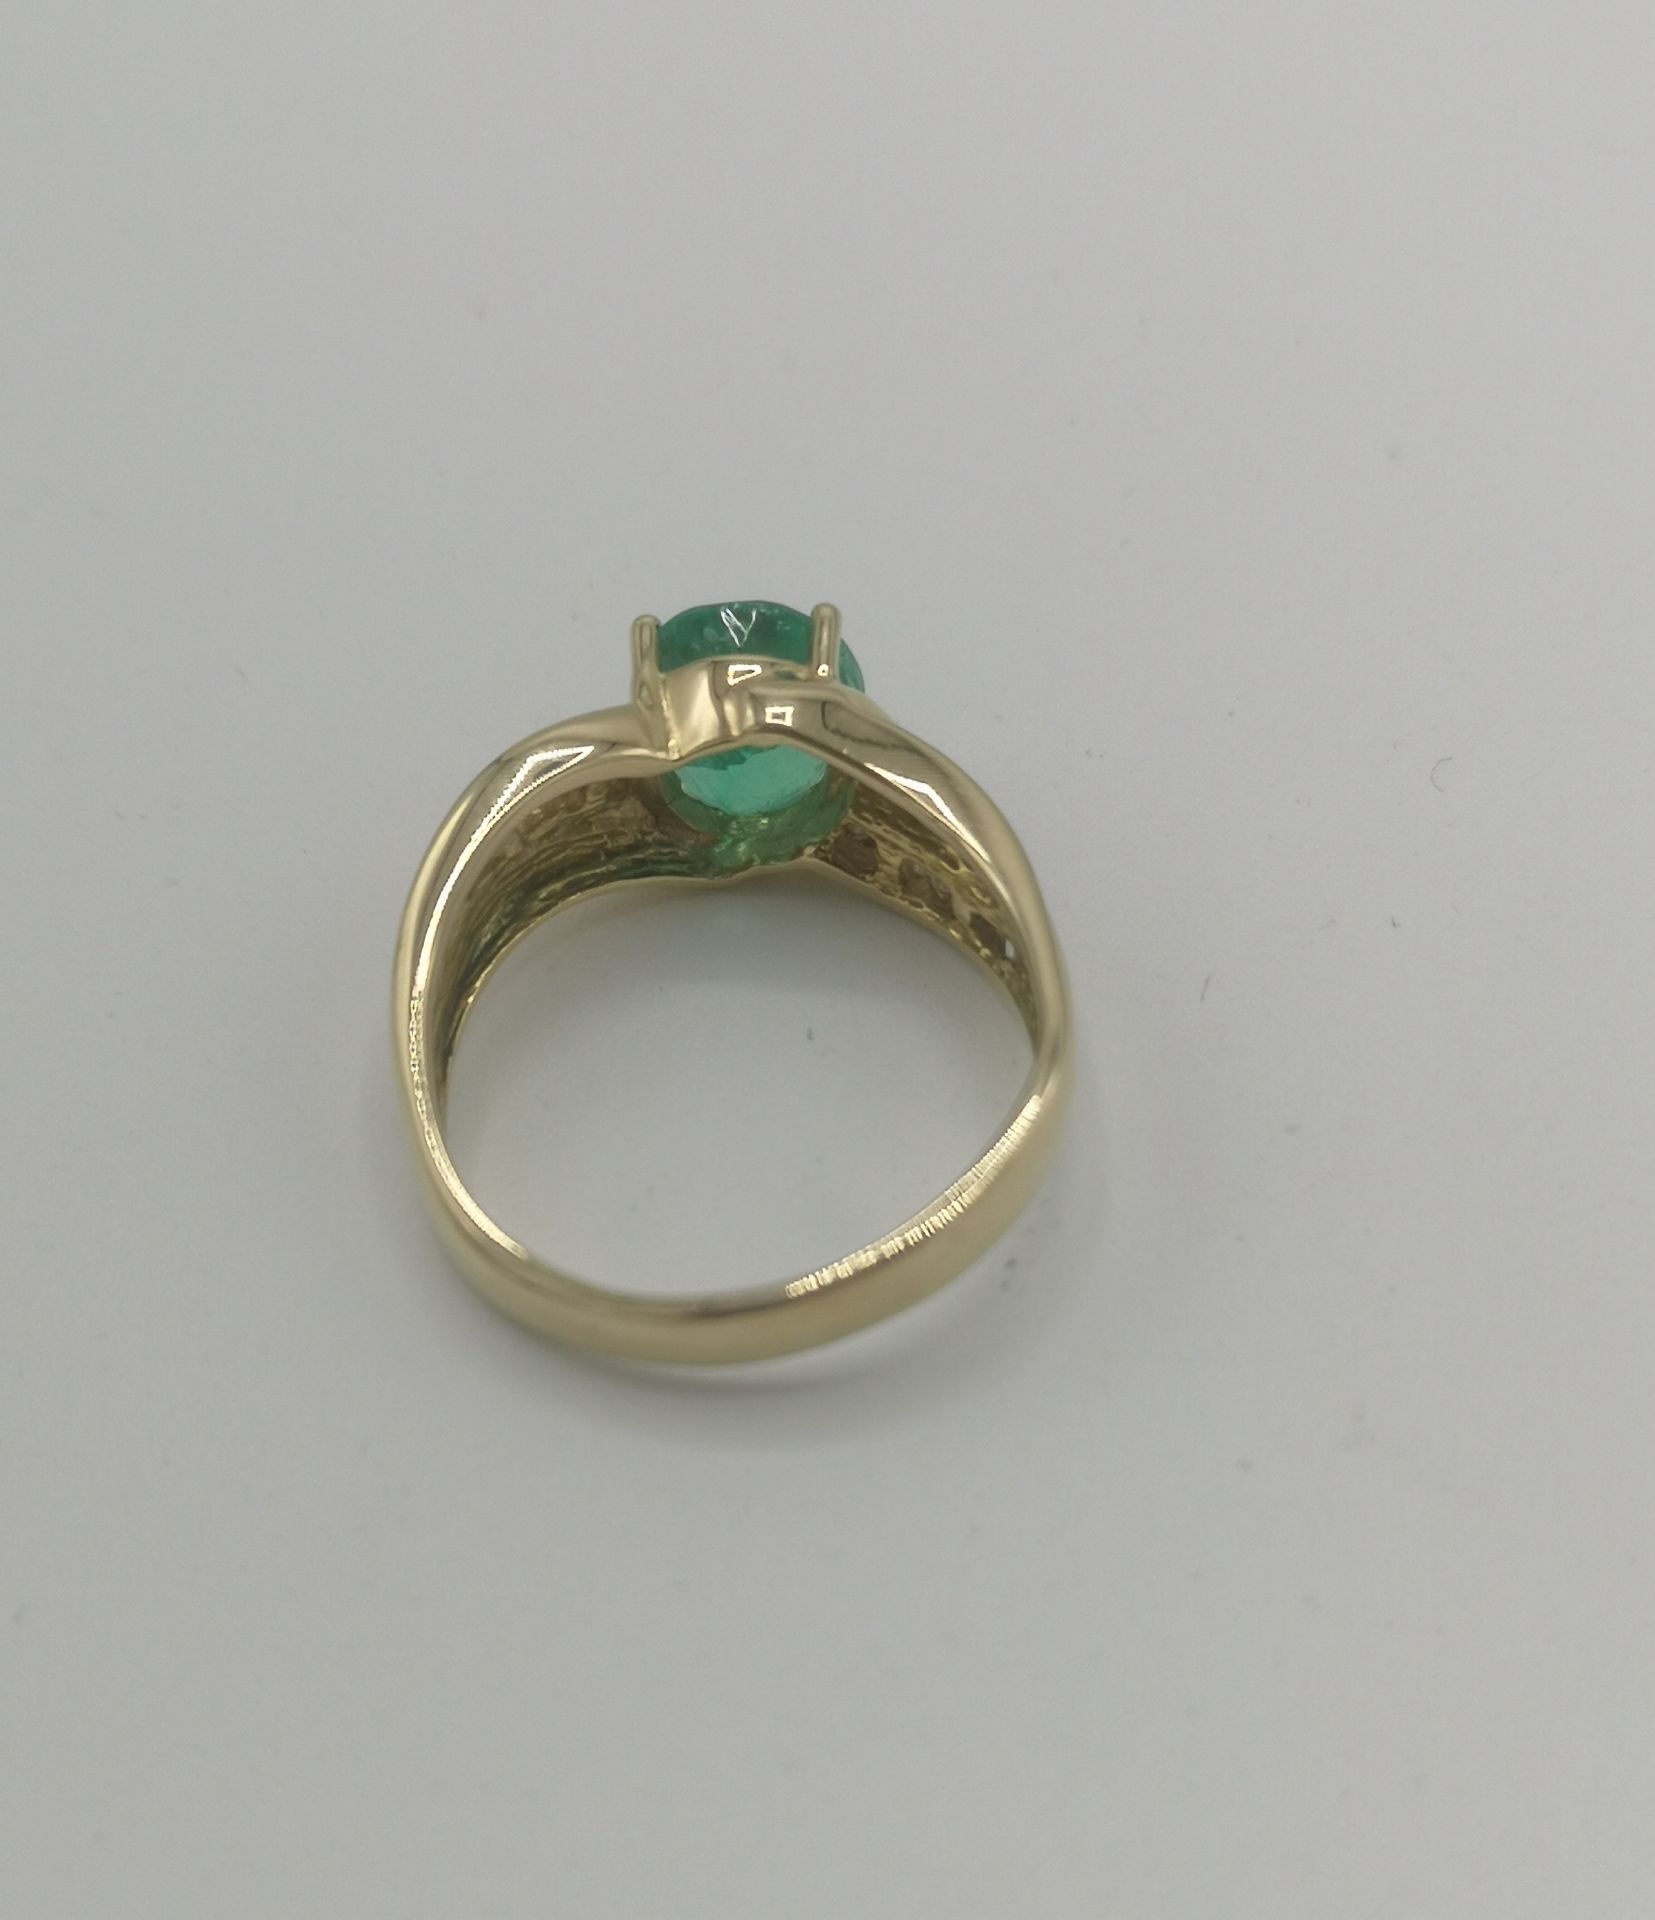 Emerald and diamond ring - Image 2 of 4